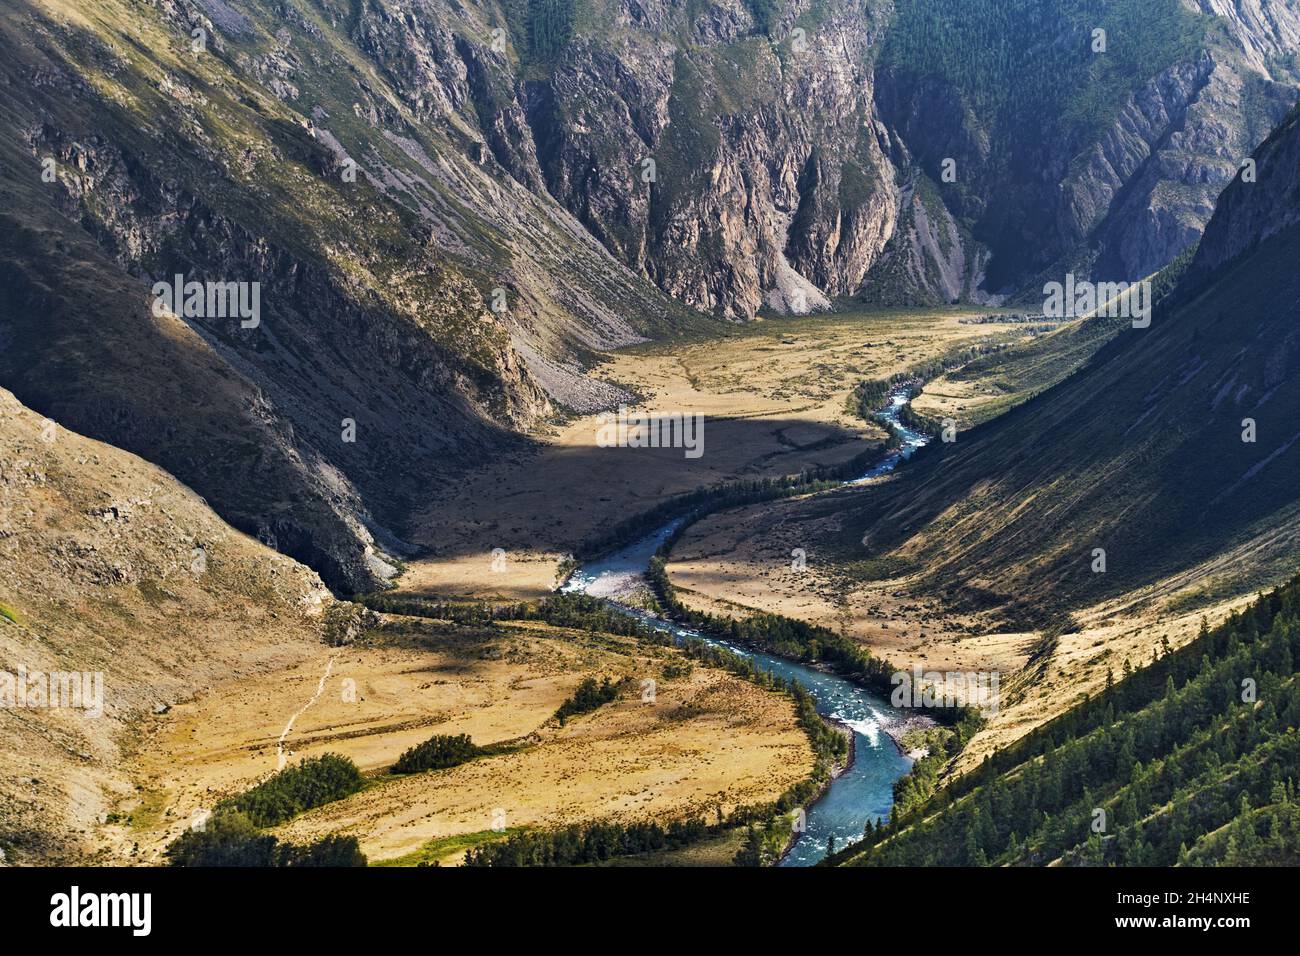 Chulyshman river canyon, view from Katu Yaryk pass in Altai mountains, Siberia, Russia Stock Photo